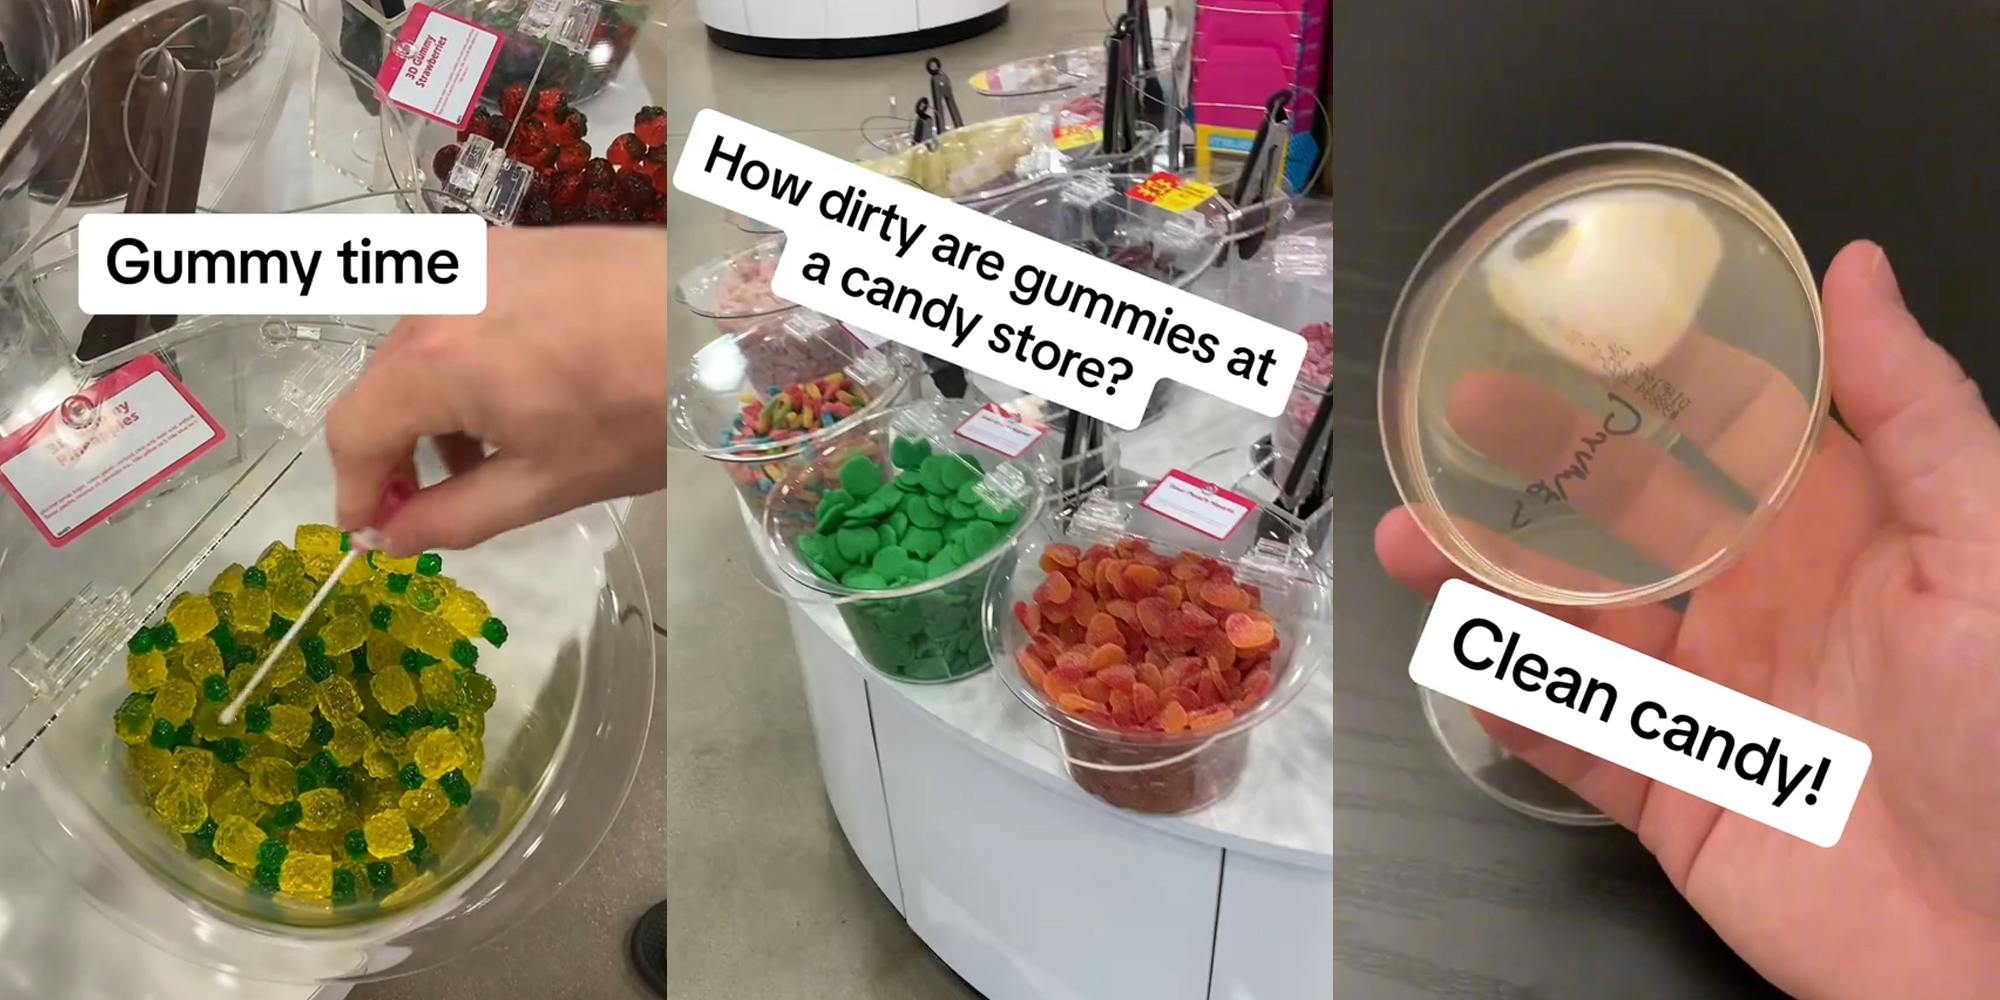 person swabbing candy store gummy bowl with caption "Gummy time" (l) candy on display at candy store with caption "How dirty are gummies at a candy store?" (c) clean petri dish in hand with caption "Clean candy!" (r)